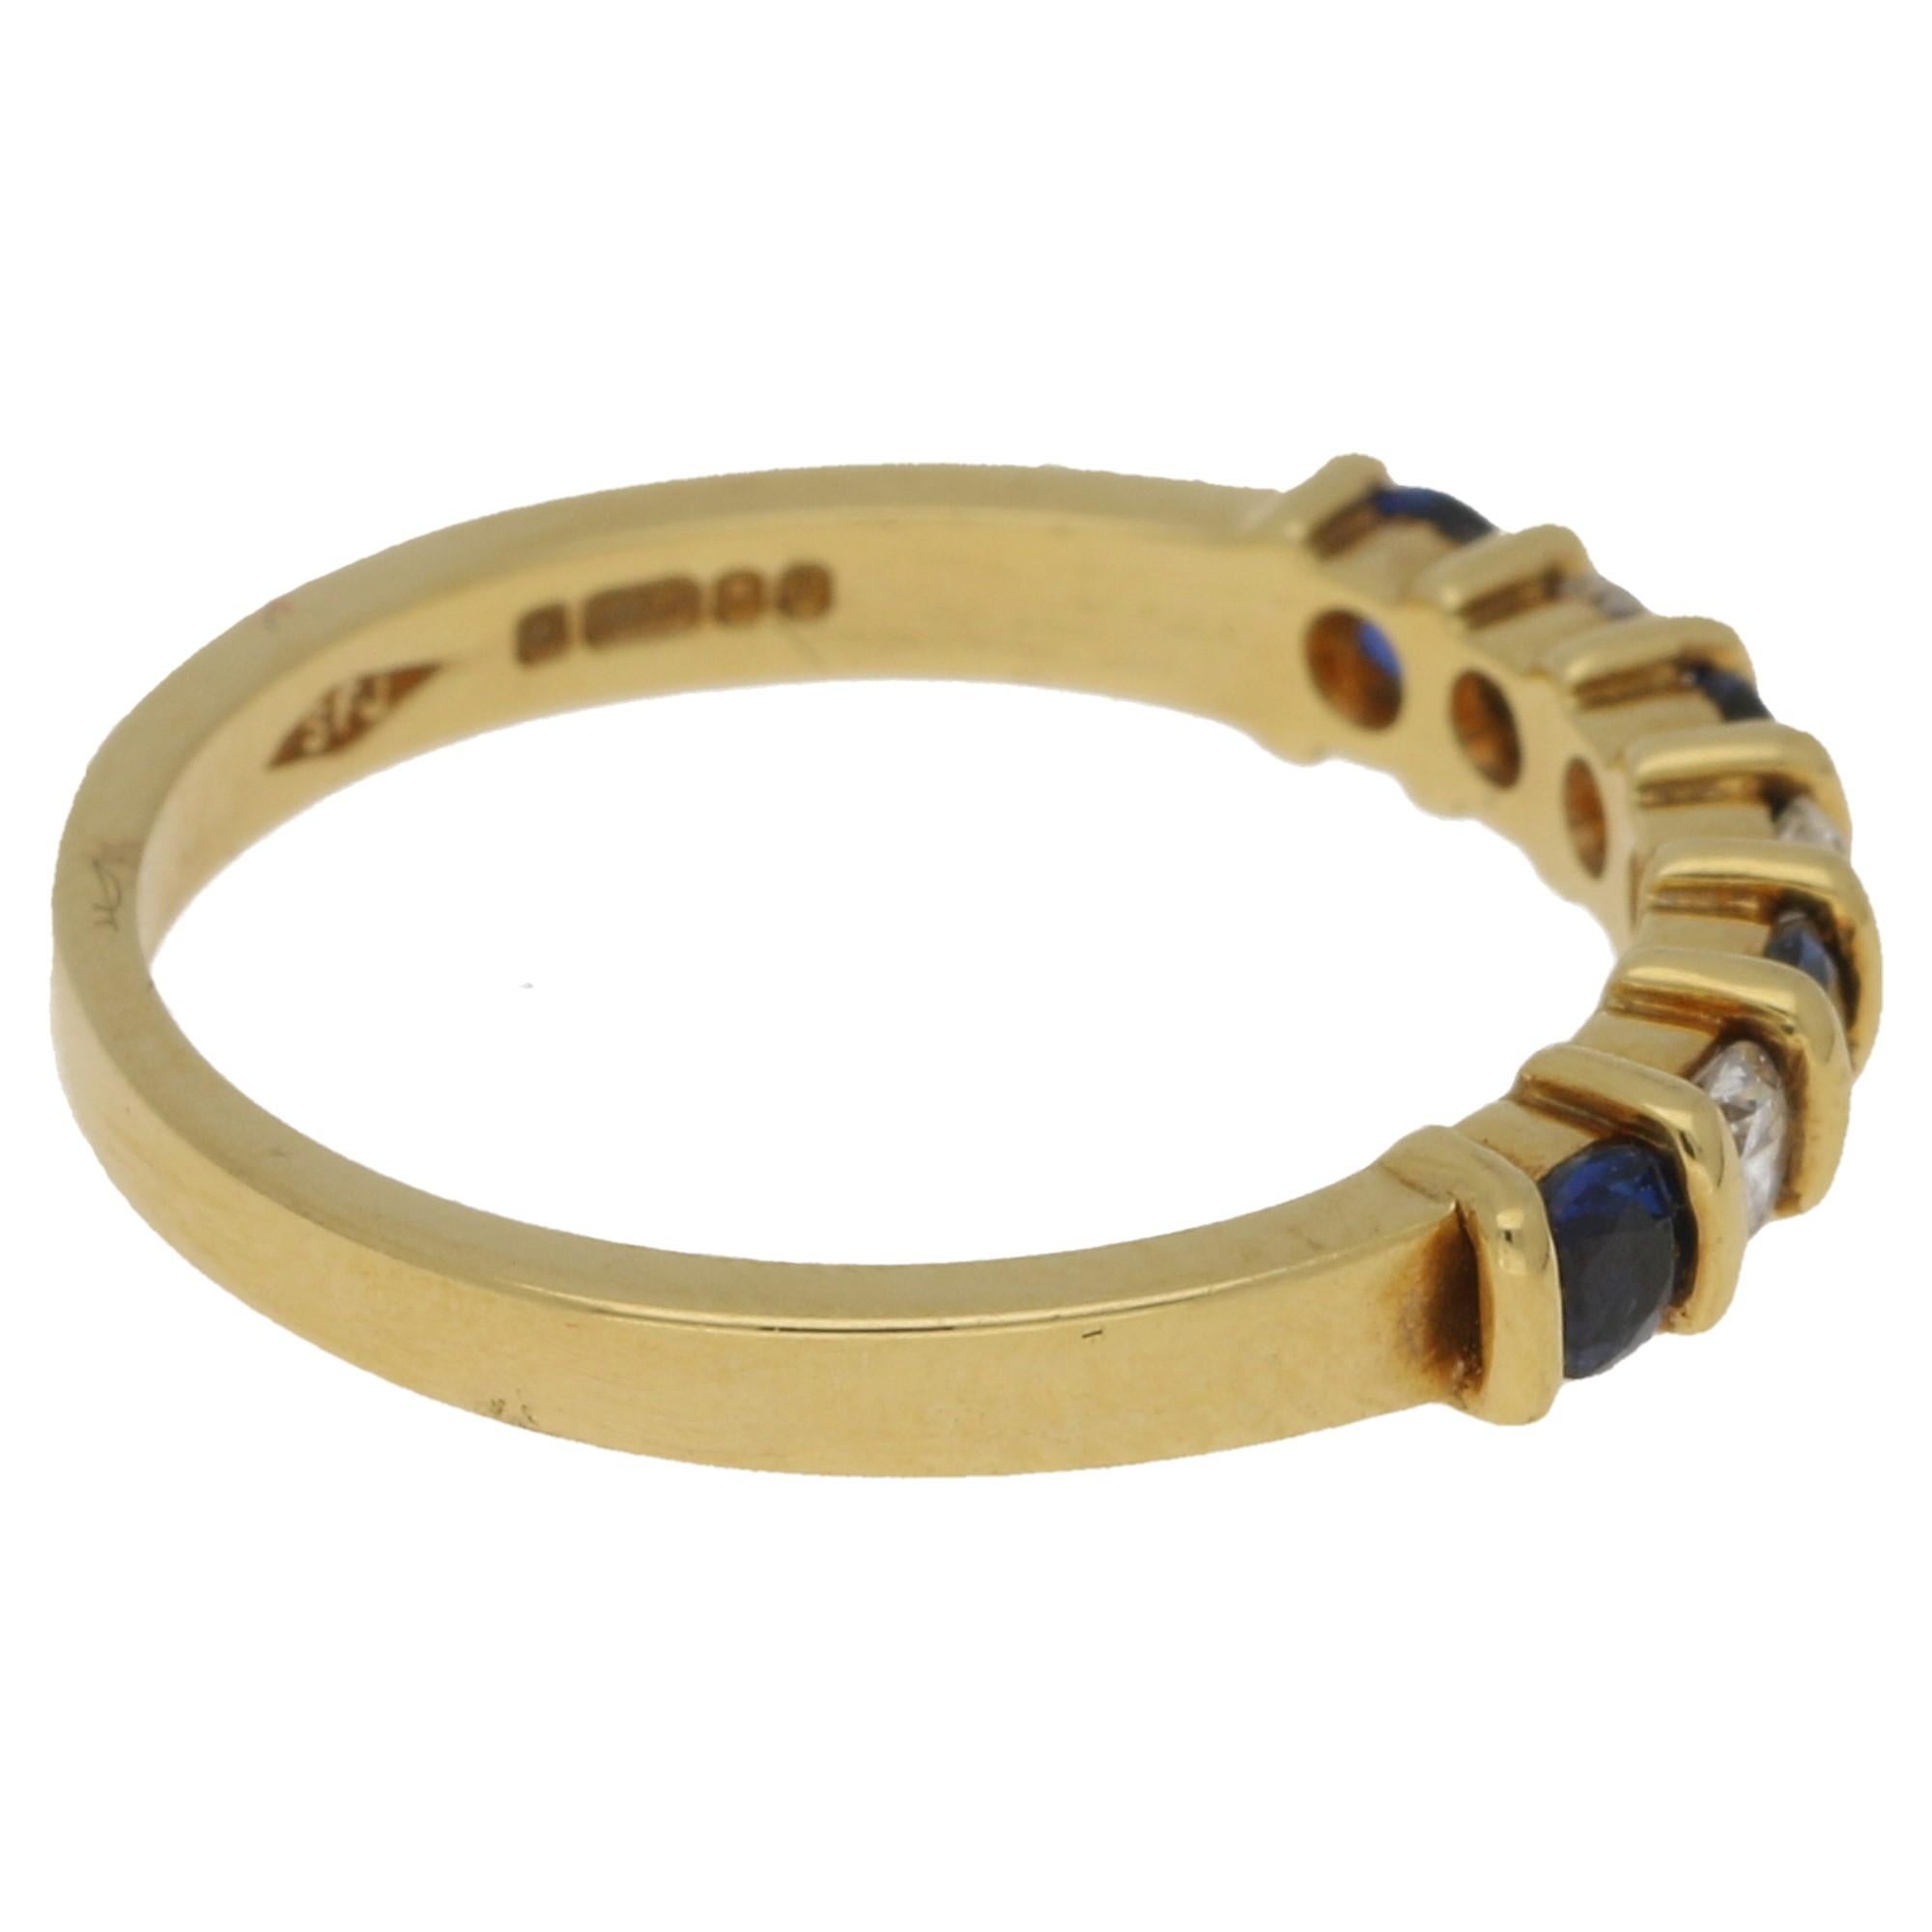 An 18ct yellow gold sapphire and diamond set half eternity ring, Comprising of three round brilliant cut diamonds and four round cut sapphires. Stamped '750' for 18 karat gold. Ring size is presently a K 1/2, this can be adjusted to your finger size.